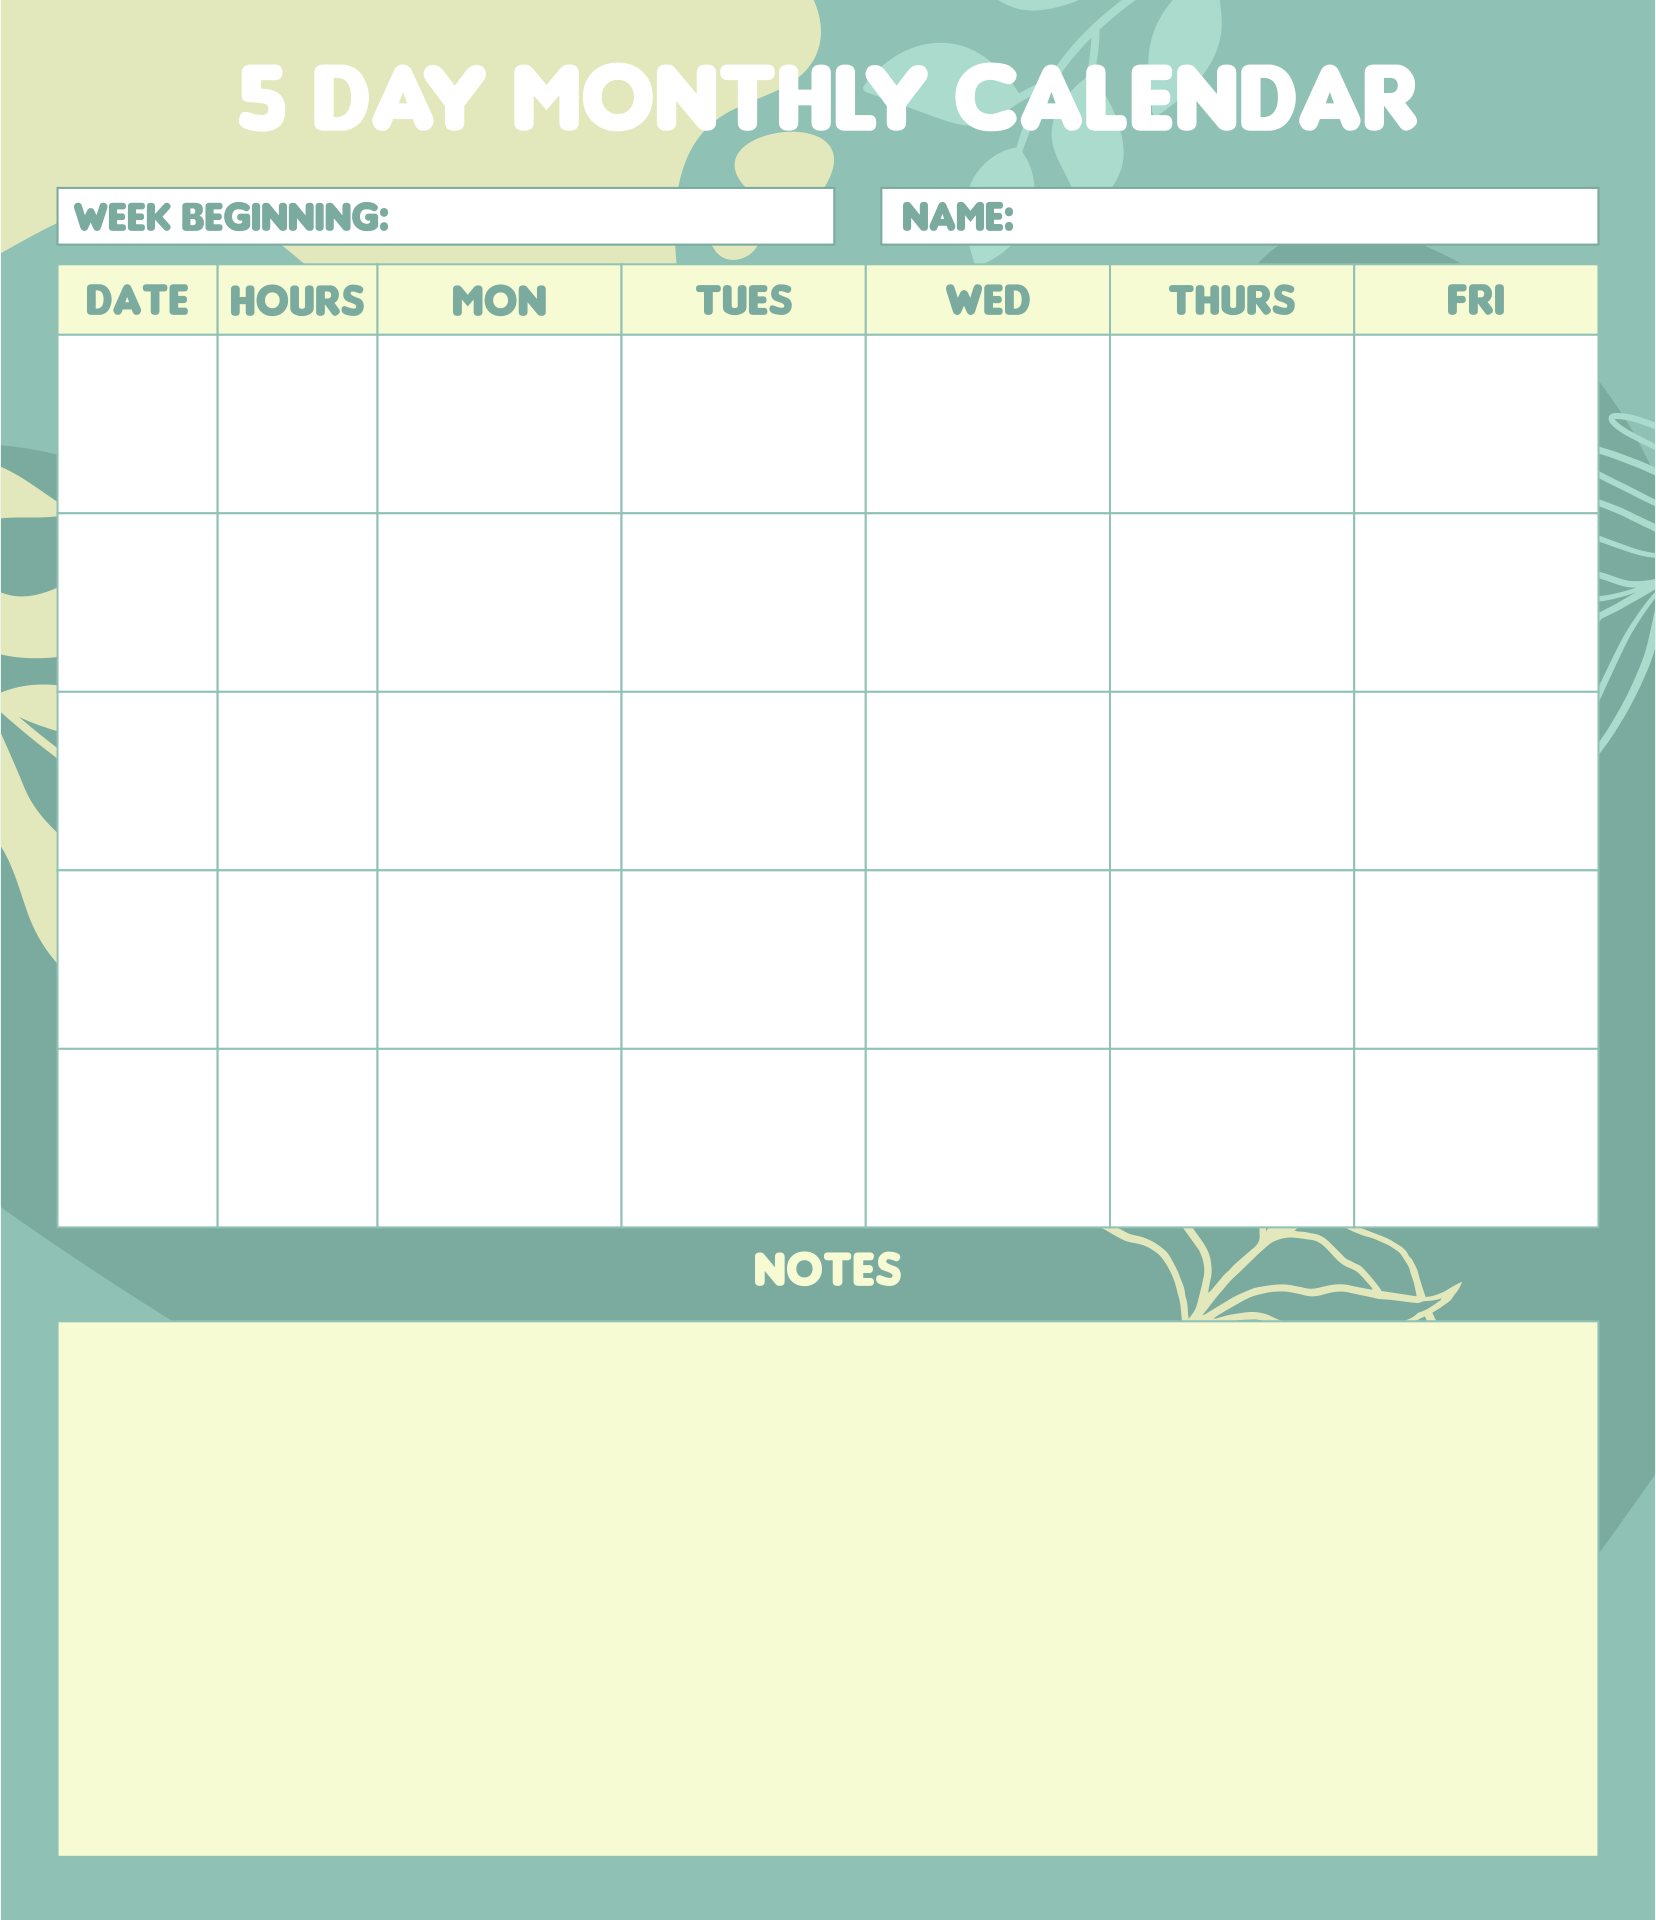 7-best-images-of-5-day-work-week-monthly-calendar-printable-5-day